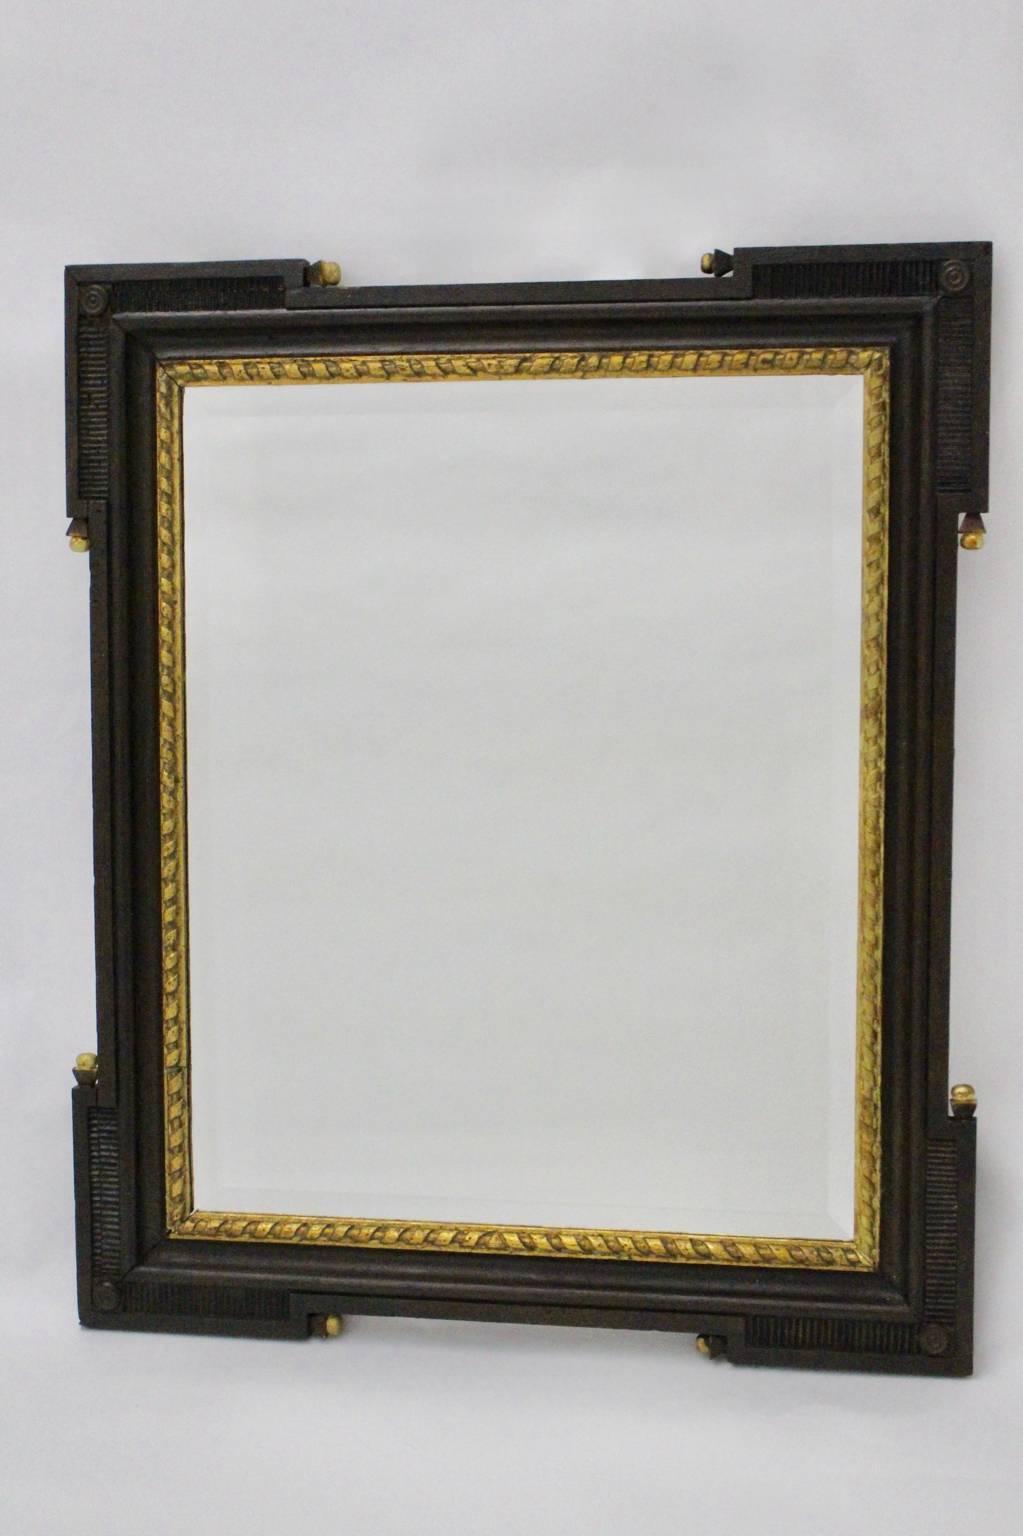 Antique Wall Mirror from hand-carved dark brown solid oakwood frame  with golden details as golden bullets and carved details with a great patina.
An amazing wall mirror in rectangular shape with a facetted renewed mirror glass.
The style of this